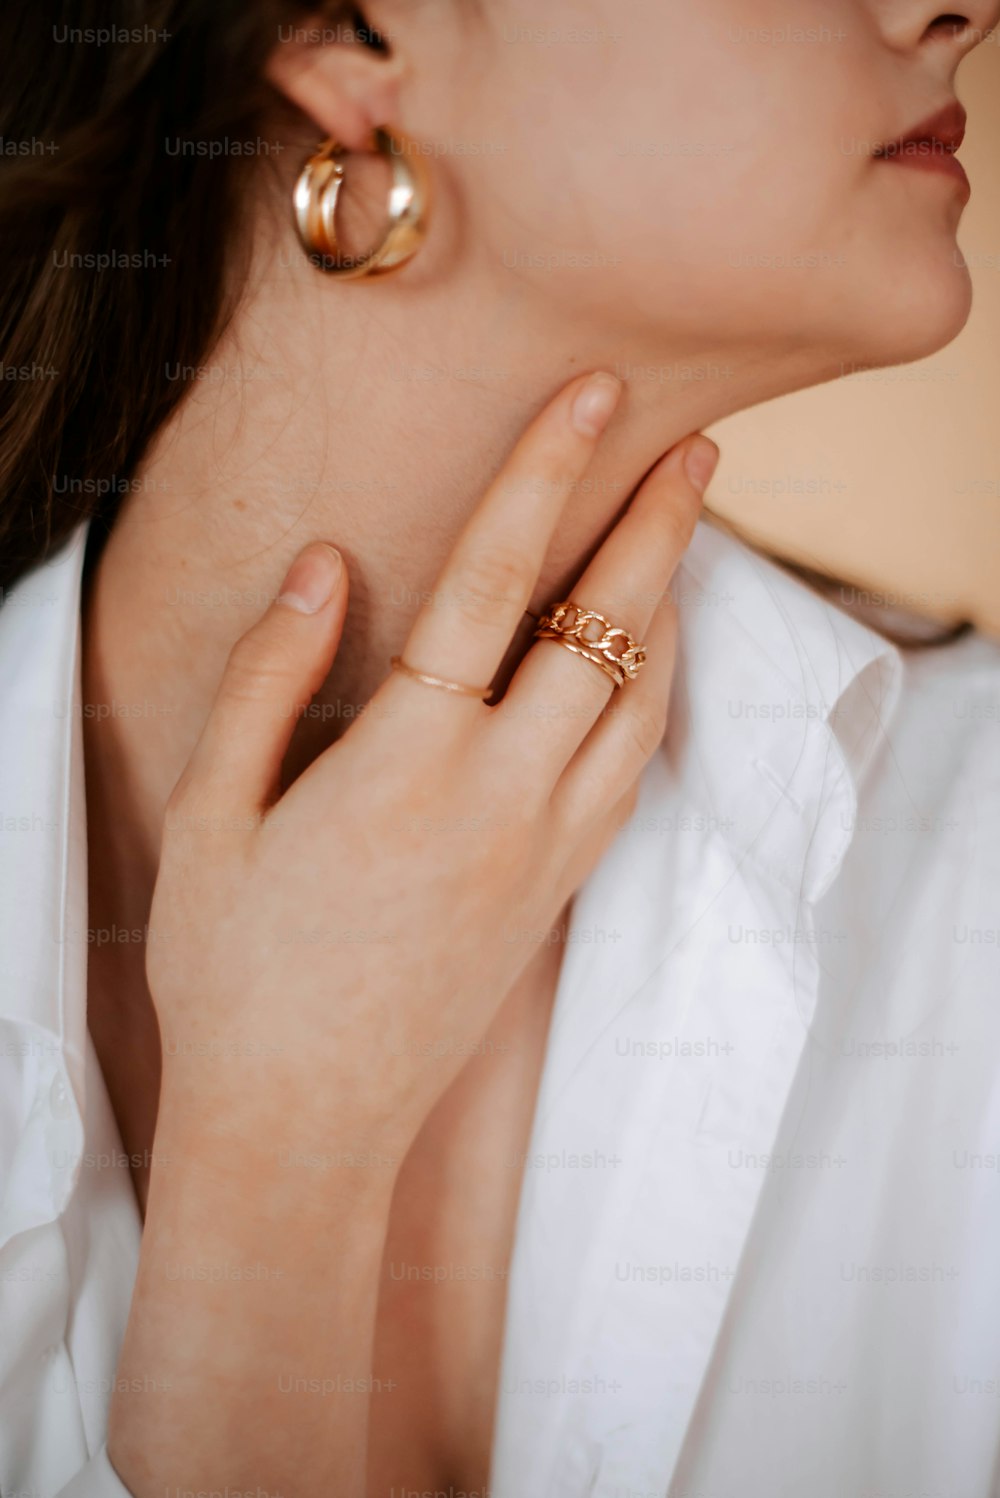 a close up of a person wearing a ring